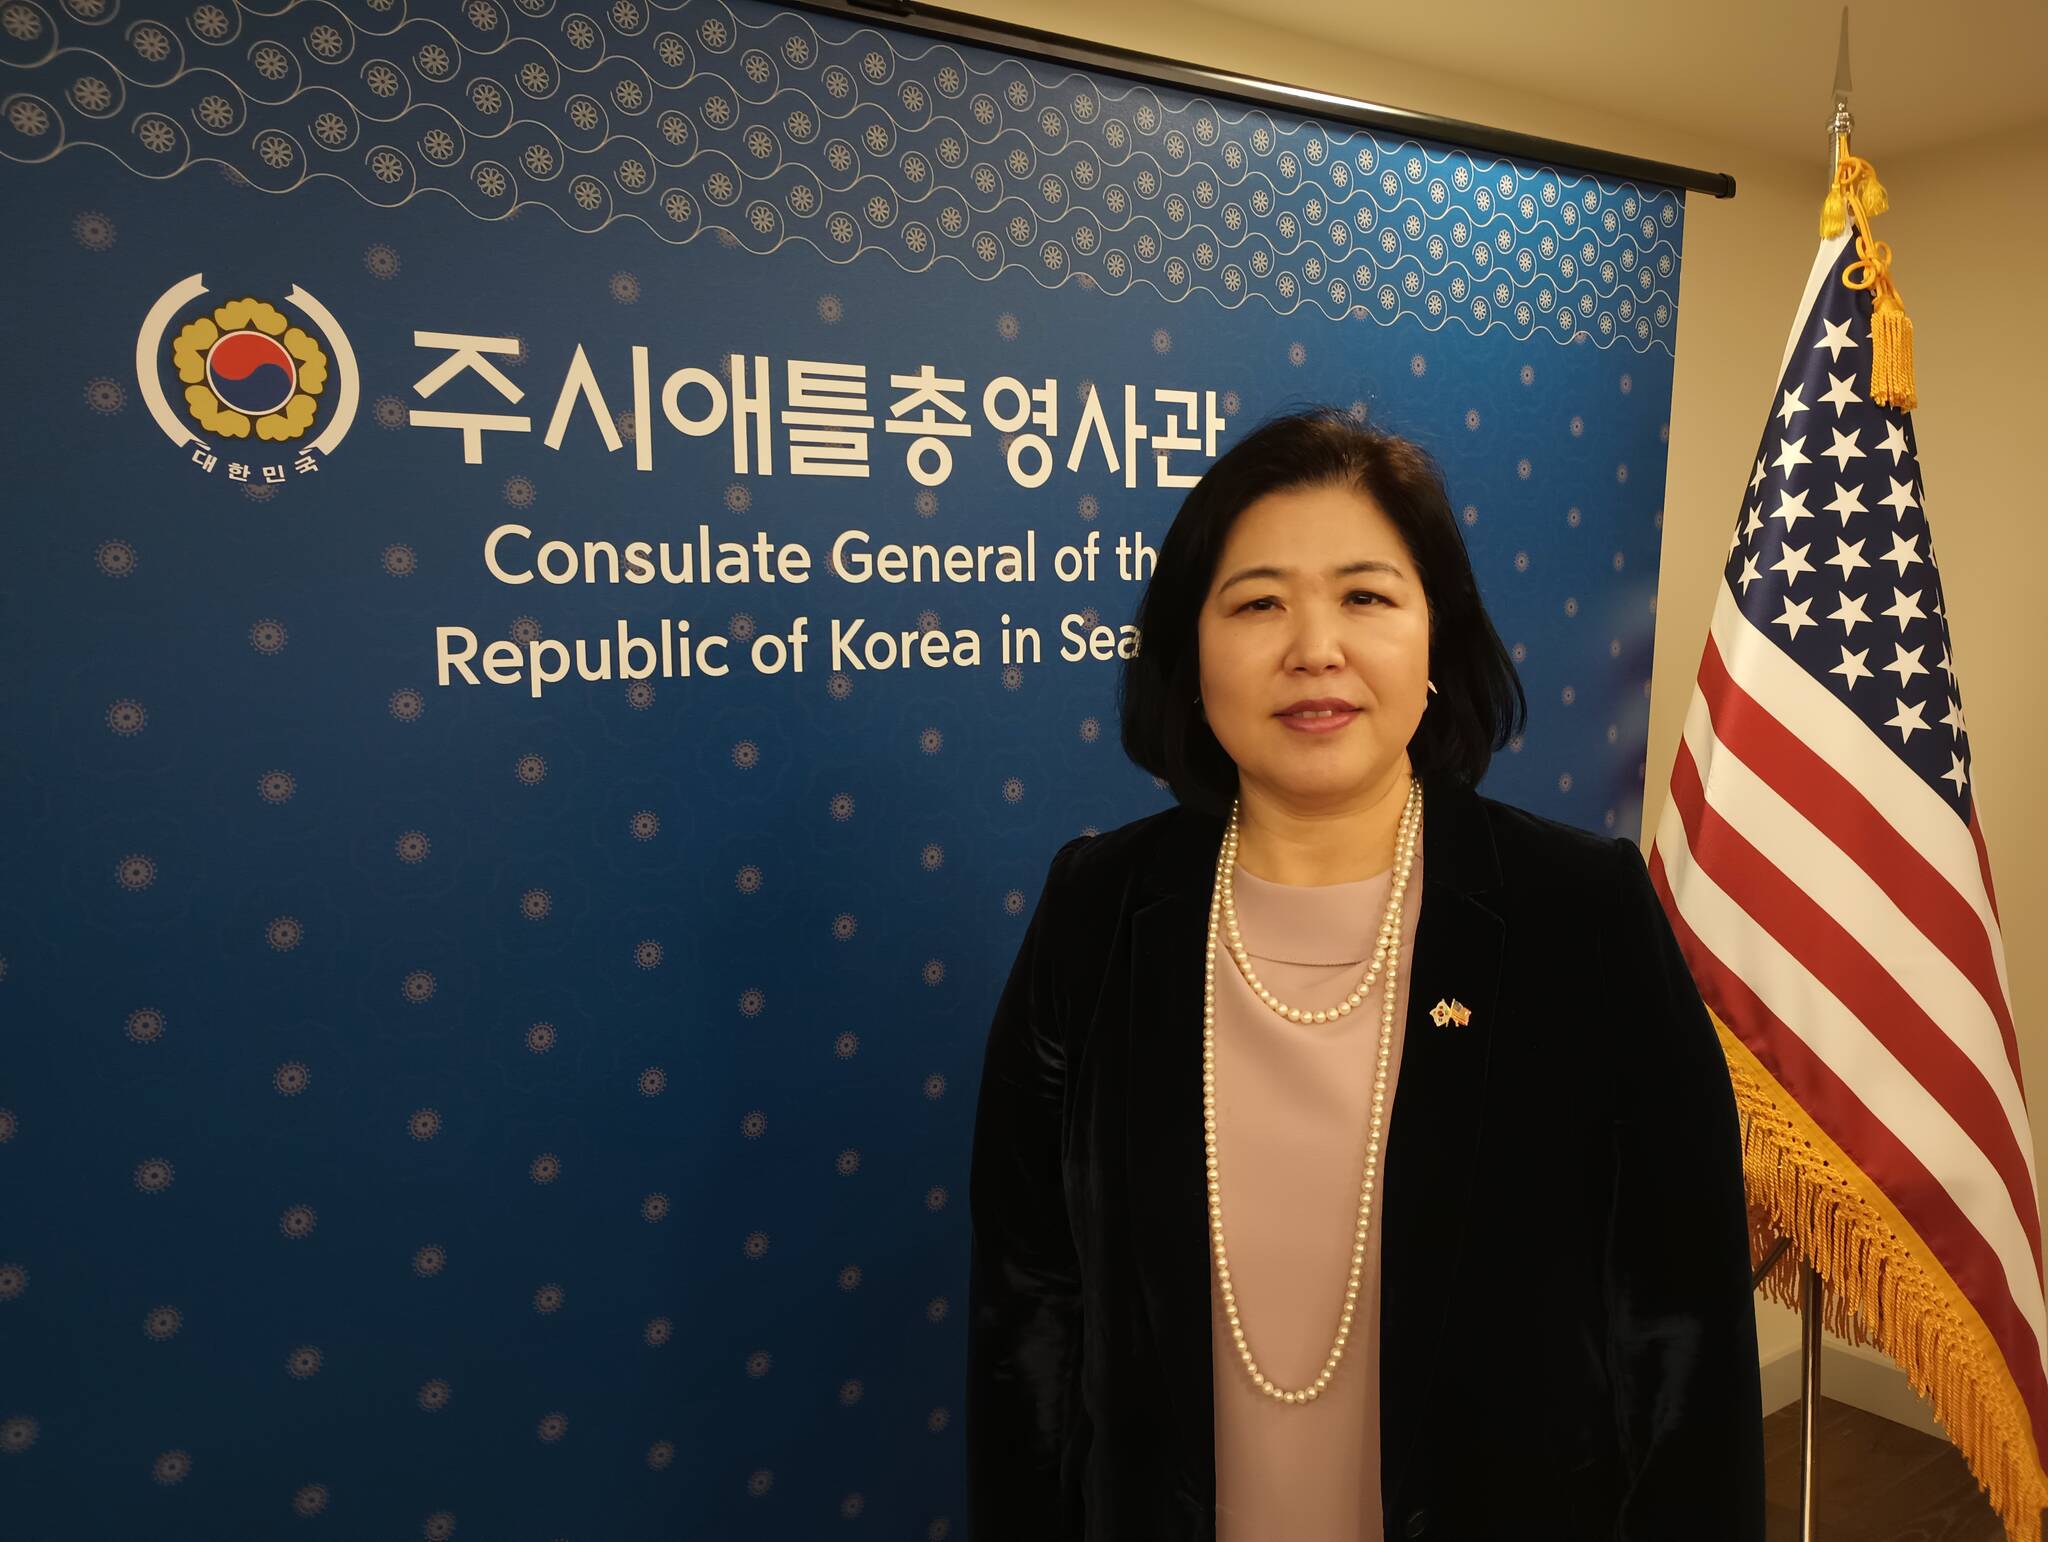 Consul-General Seo at the Consulate-General building in Seattle. Bailey Jo Josie/Sound Publishing